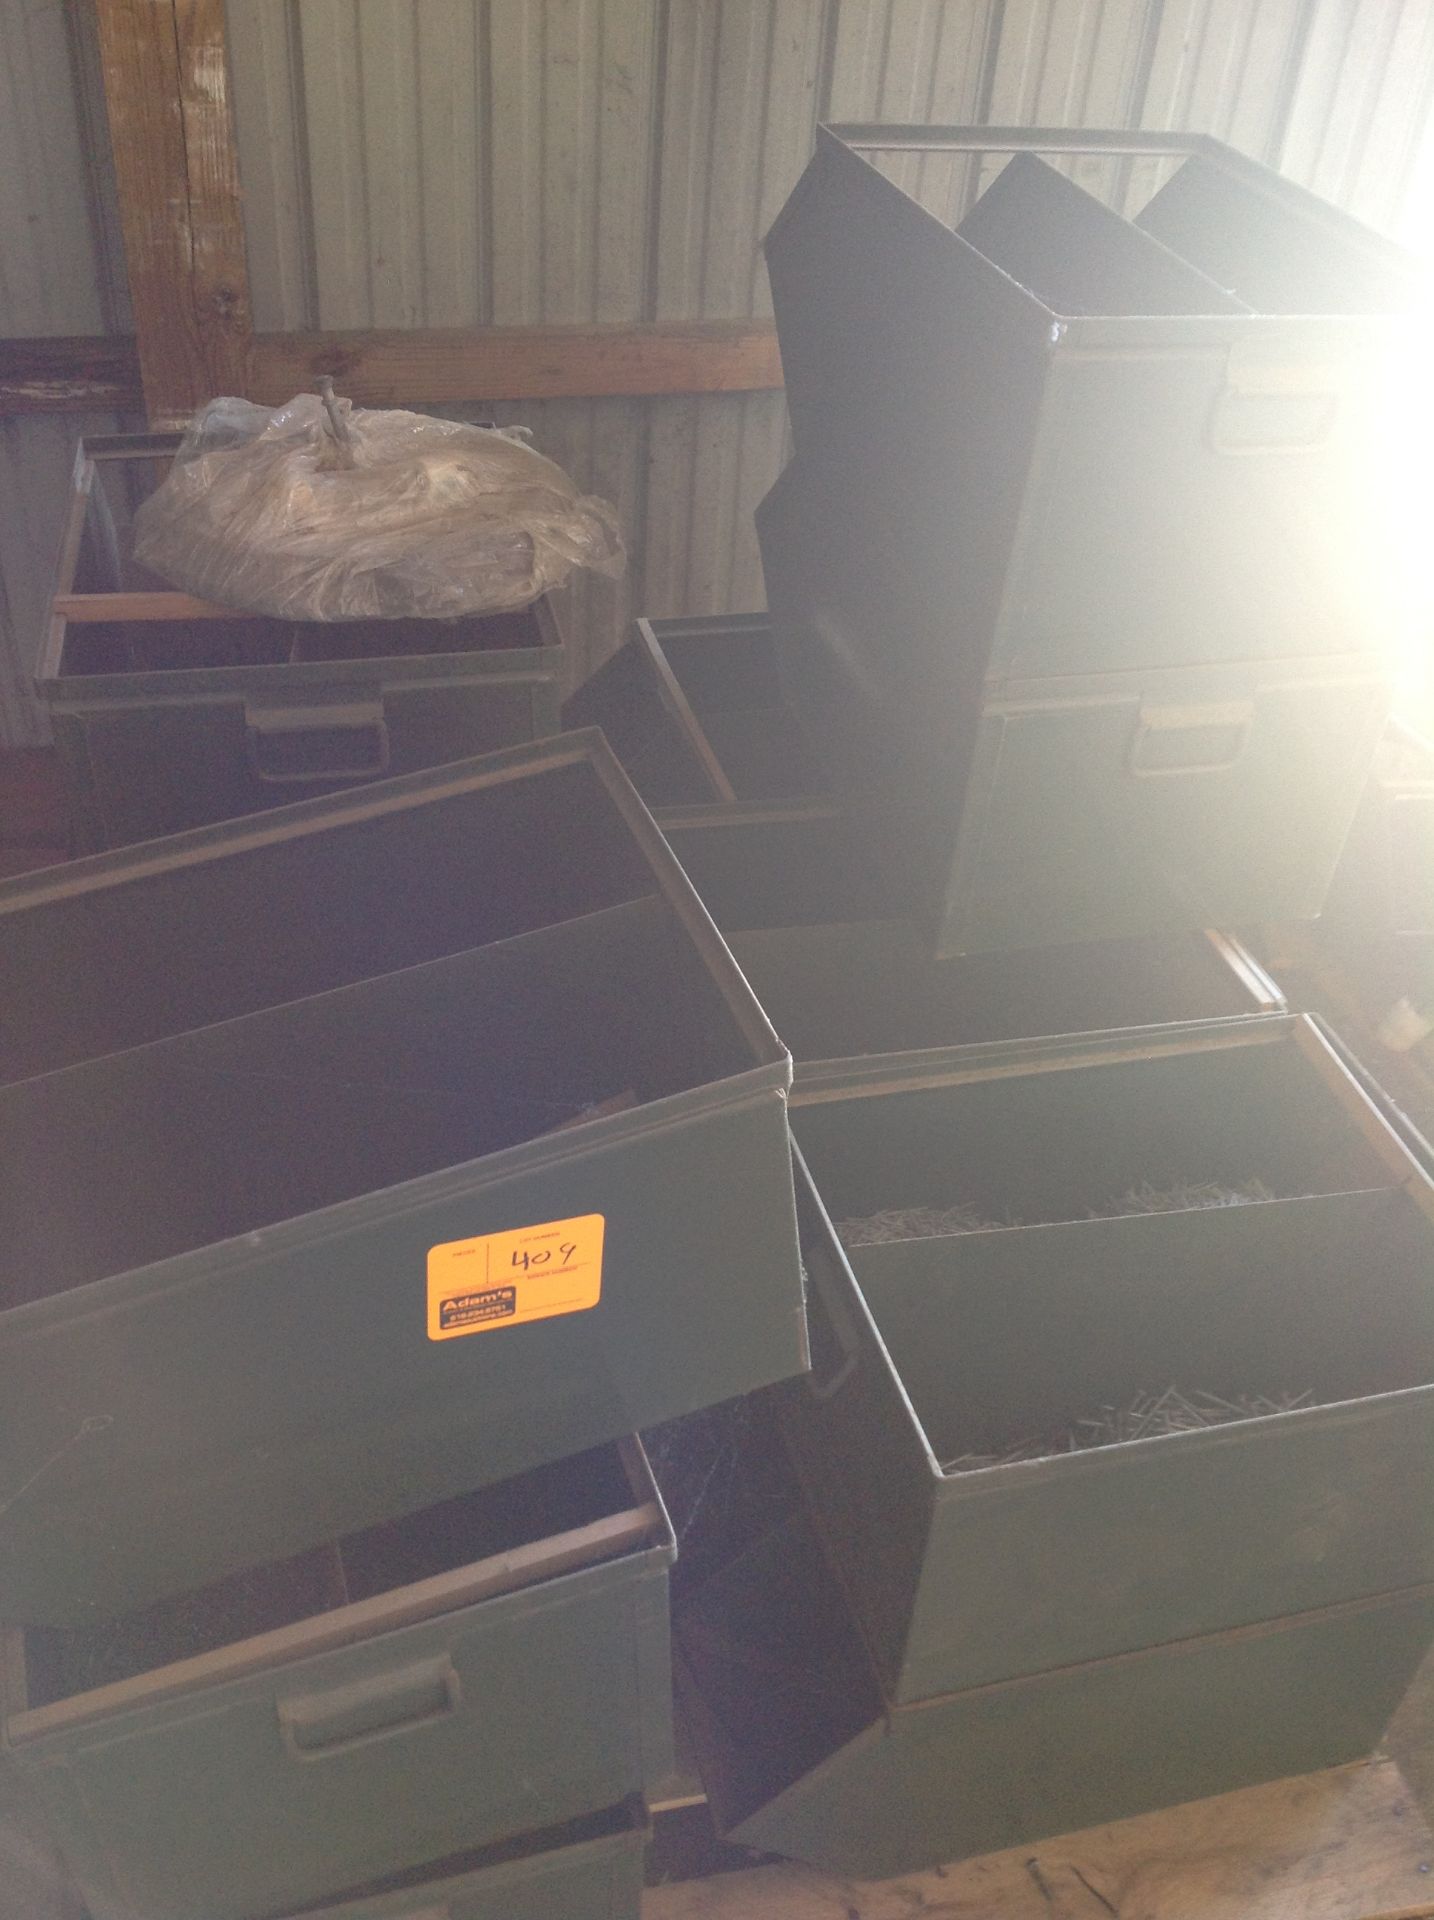 Green Metal Bins containing misc Nails